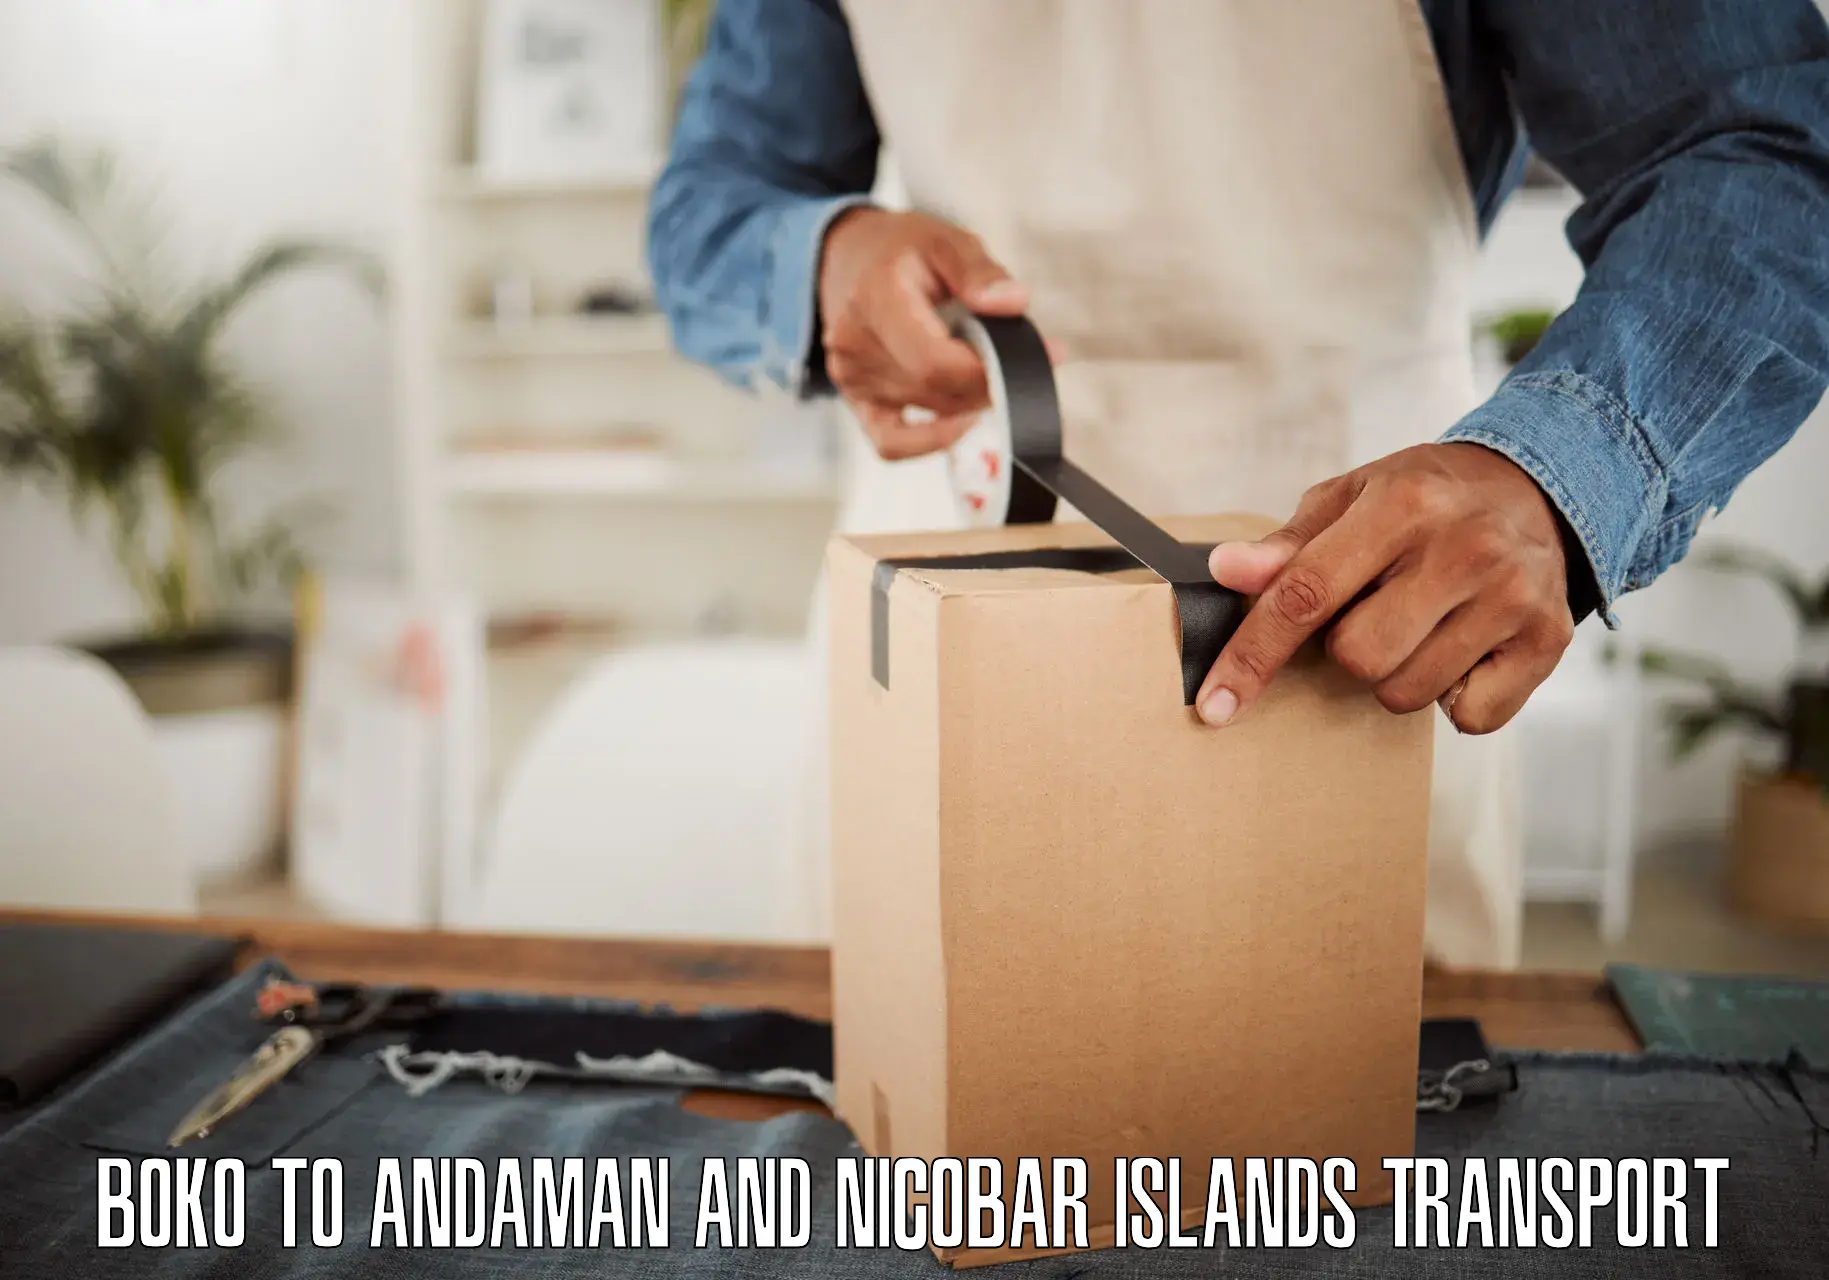 Transport shared services in Boko to Andaman and Nicobar Islands